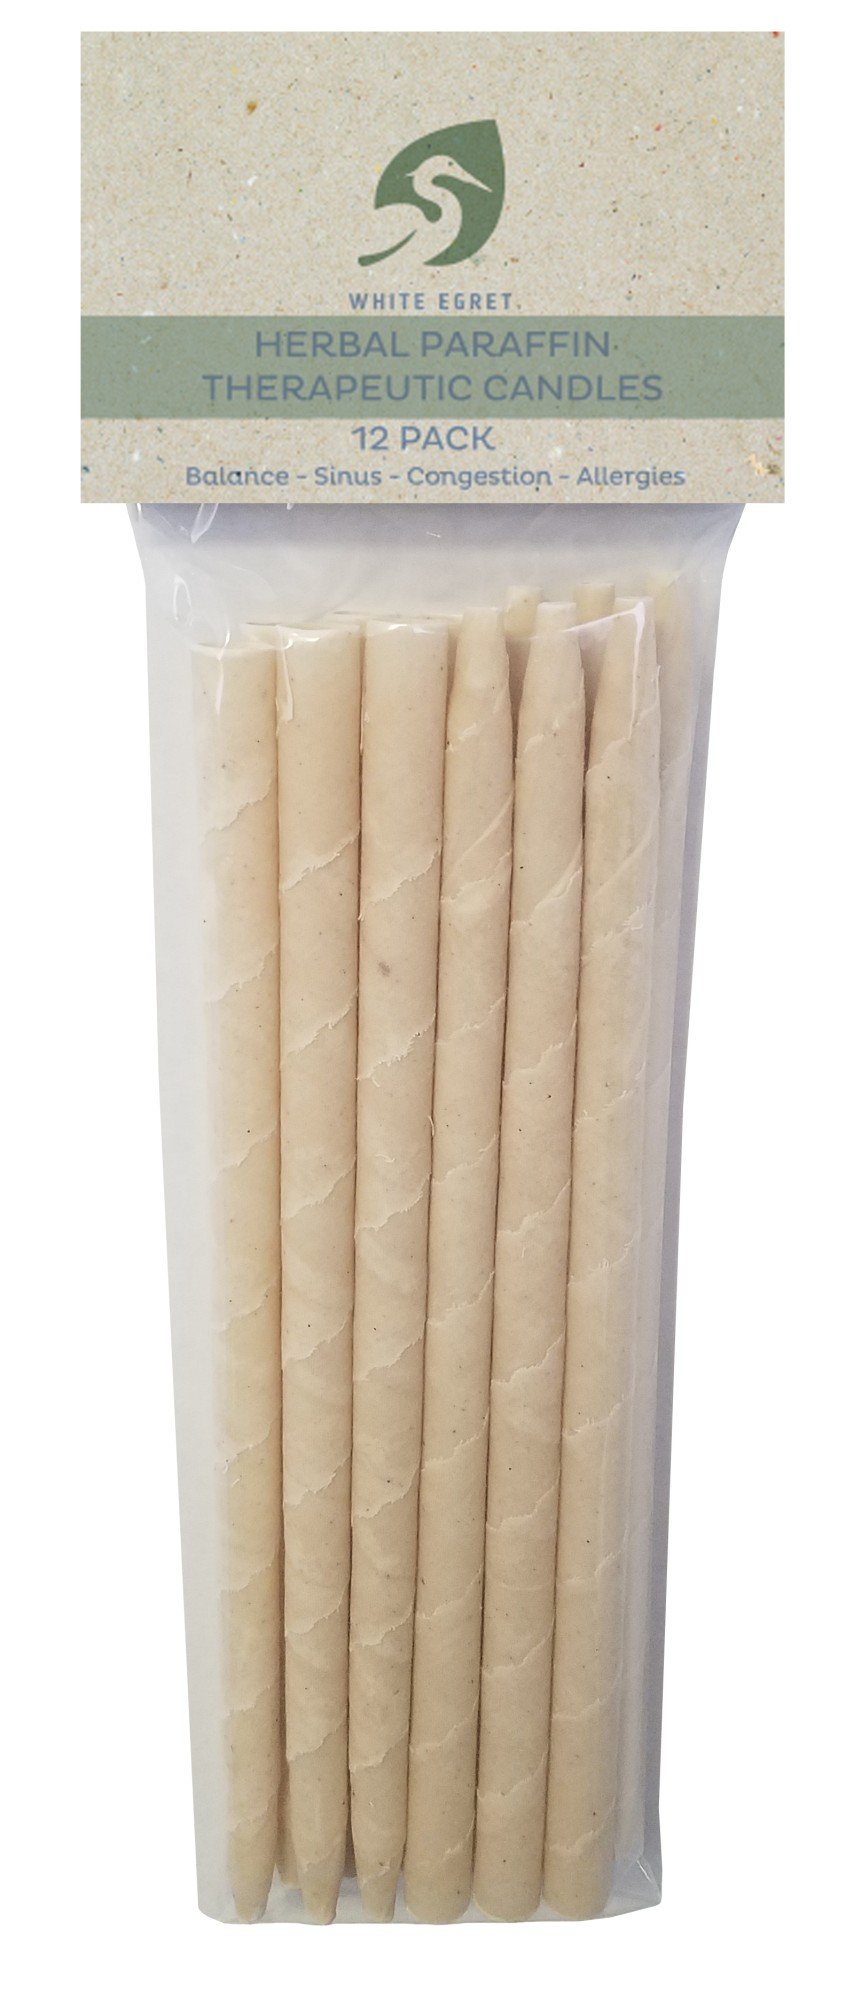 White Egret INC Herbal Paraffin Candles 12 Pack